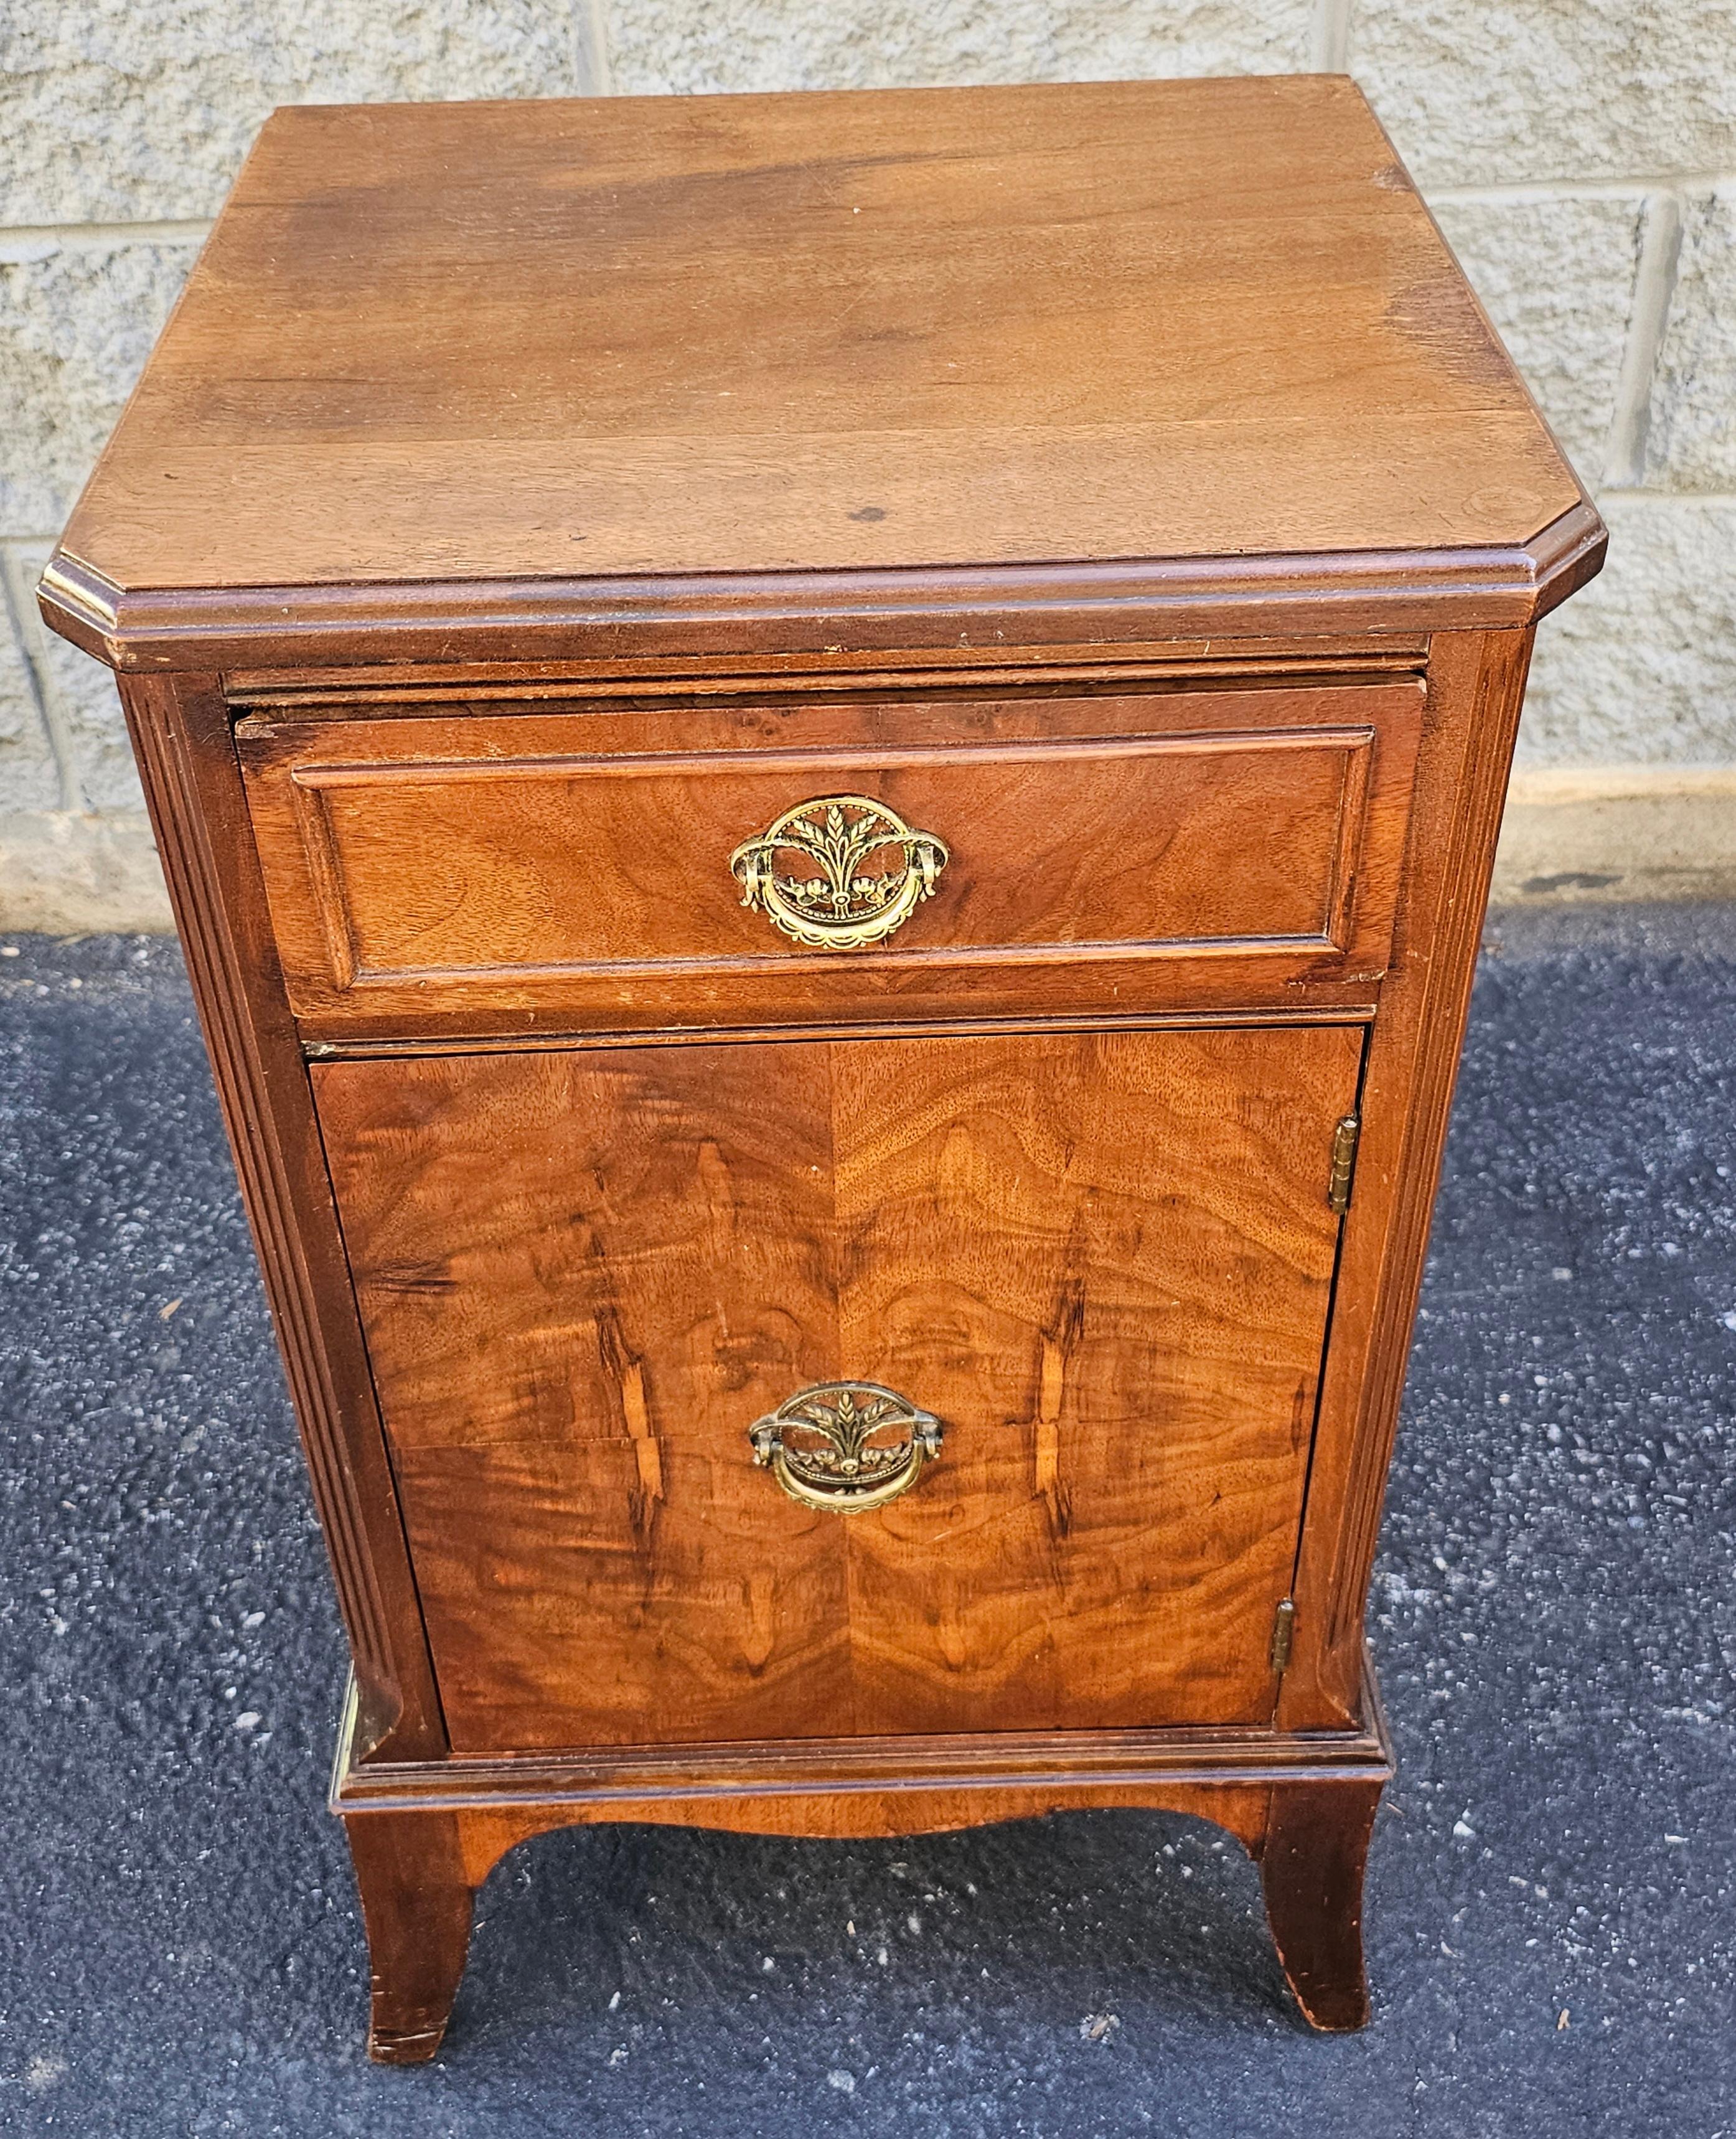 An Early 20th Century Federal Style Burl Mahogany Nightstand Side Table Cabinet.
Features one dovetail joint drawer and divided lower cabinet with smooth closing door. 
Measure 16.5